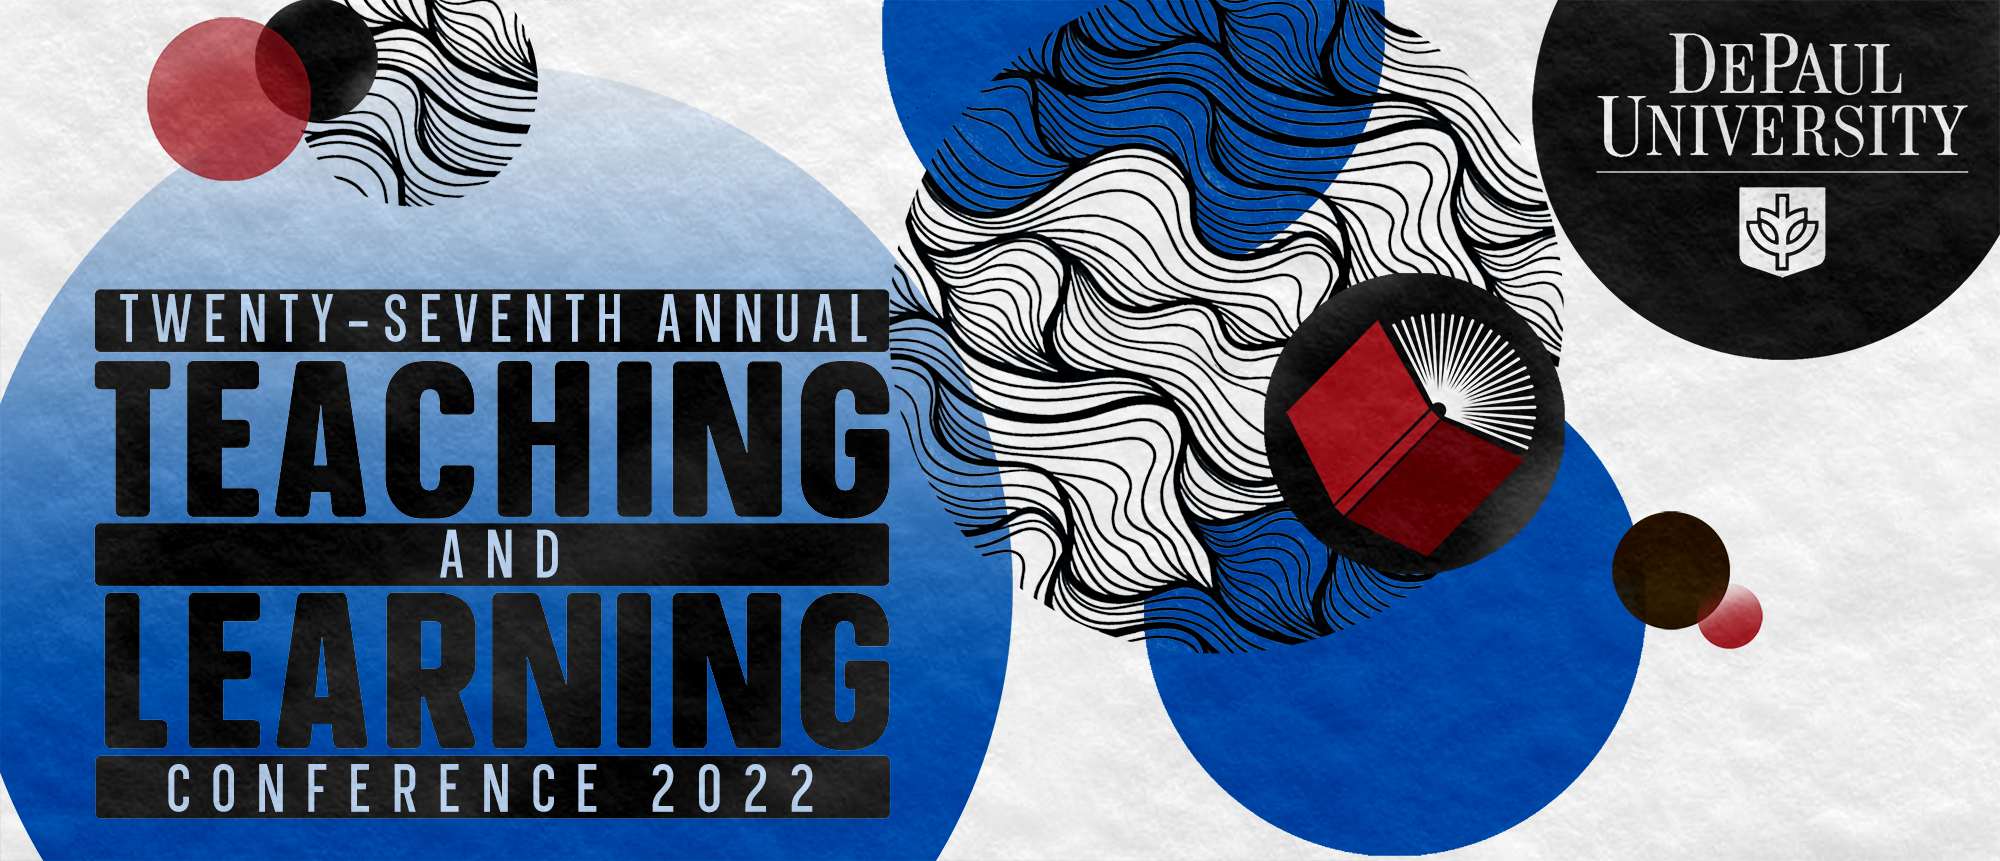 The 27th Annual Teaching and Learning Conference 2022